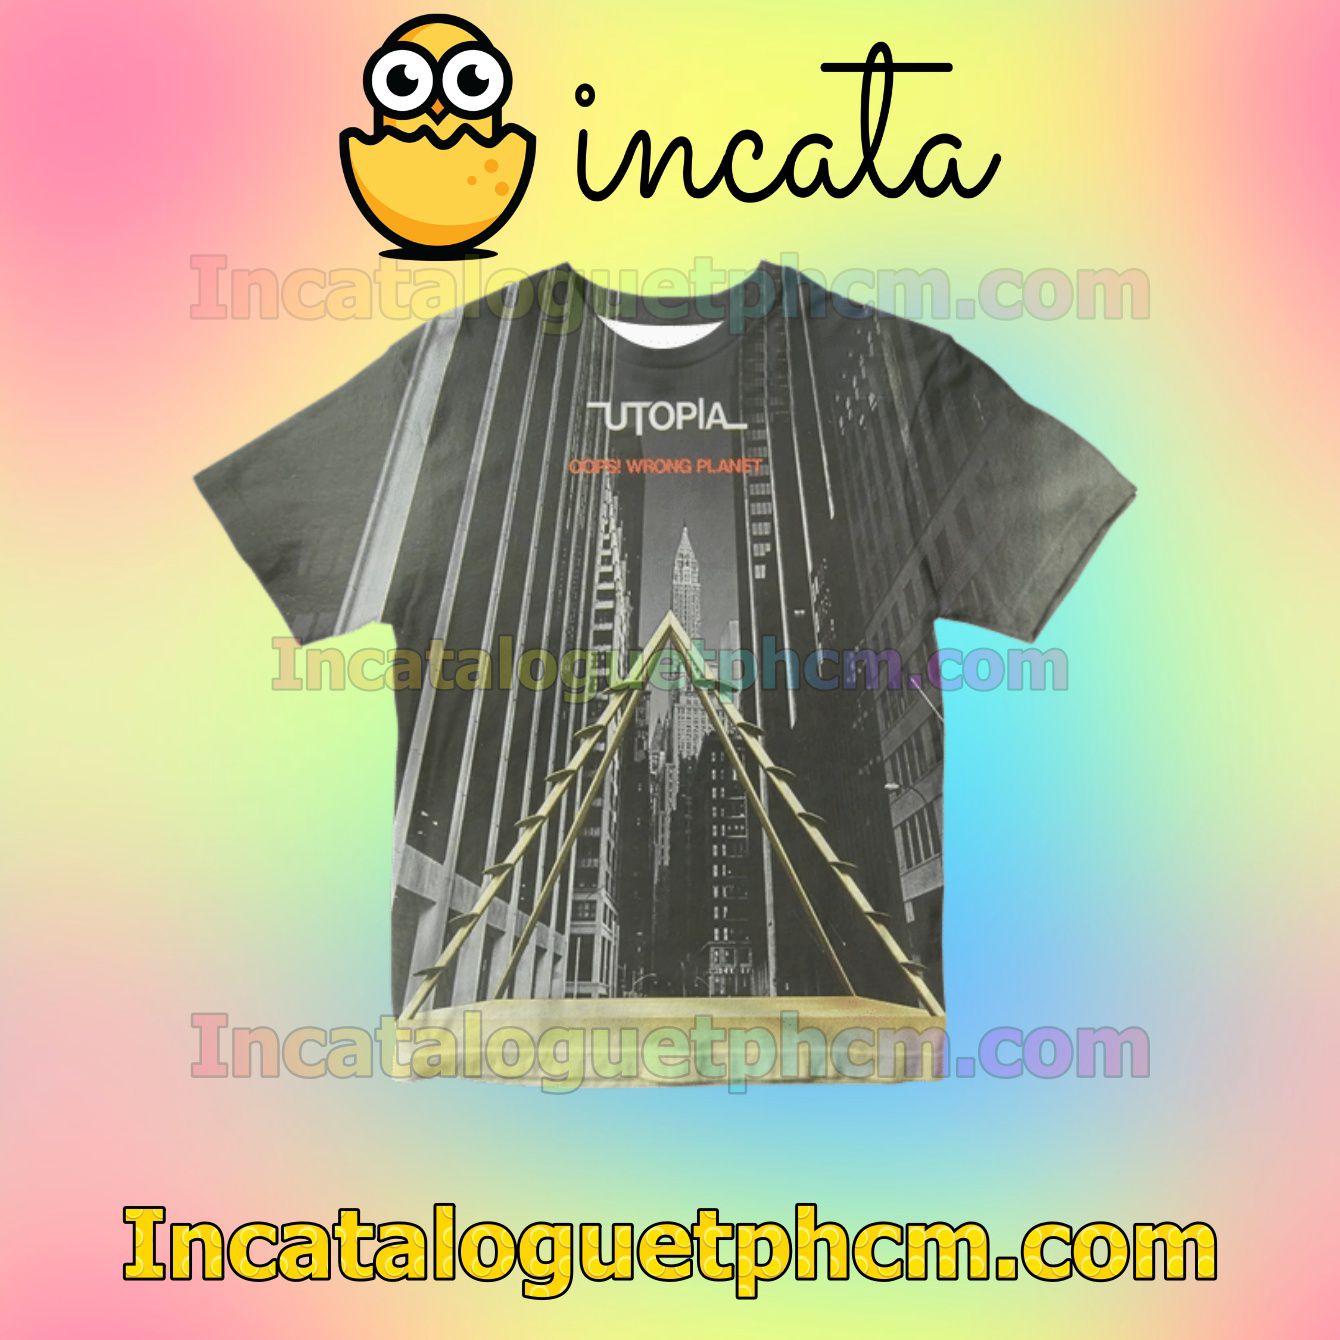 Utopia Oops Wrong Planet Album Cover Personalized Shirt